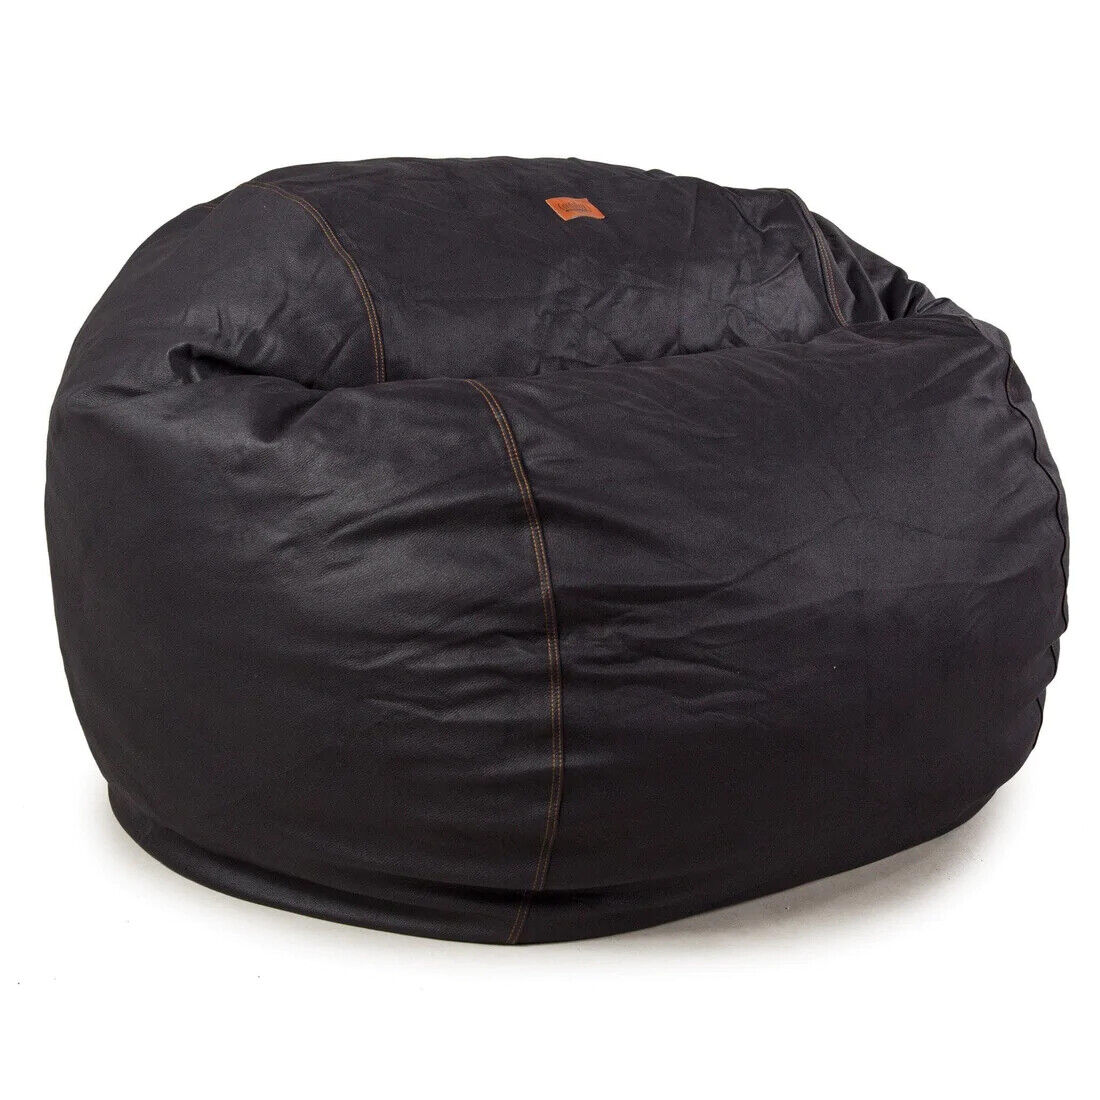 CordaRoy's Bean Bag King Size Faux Leather